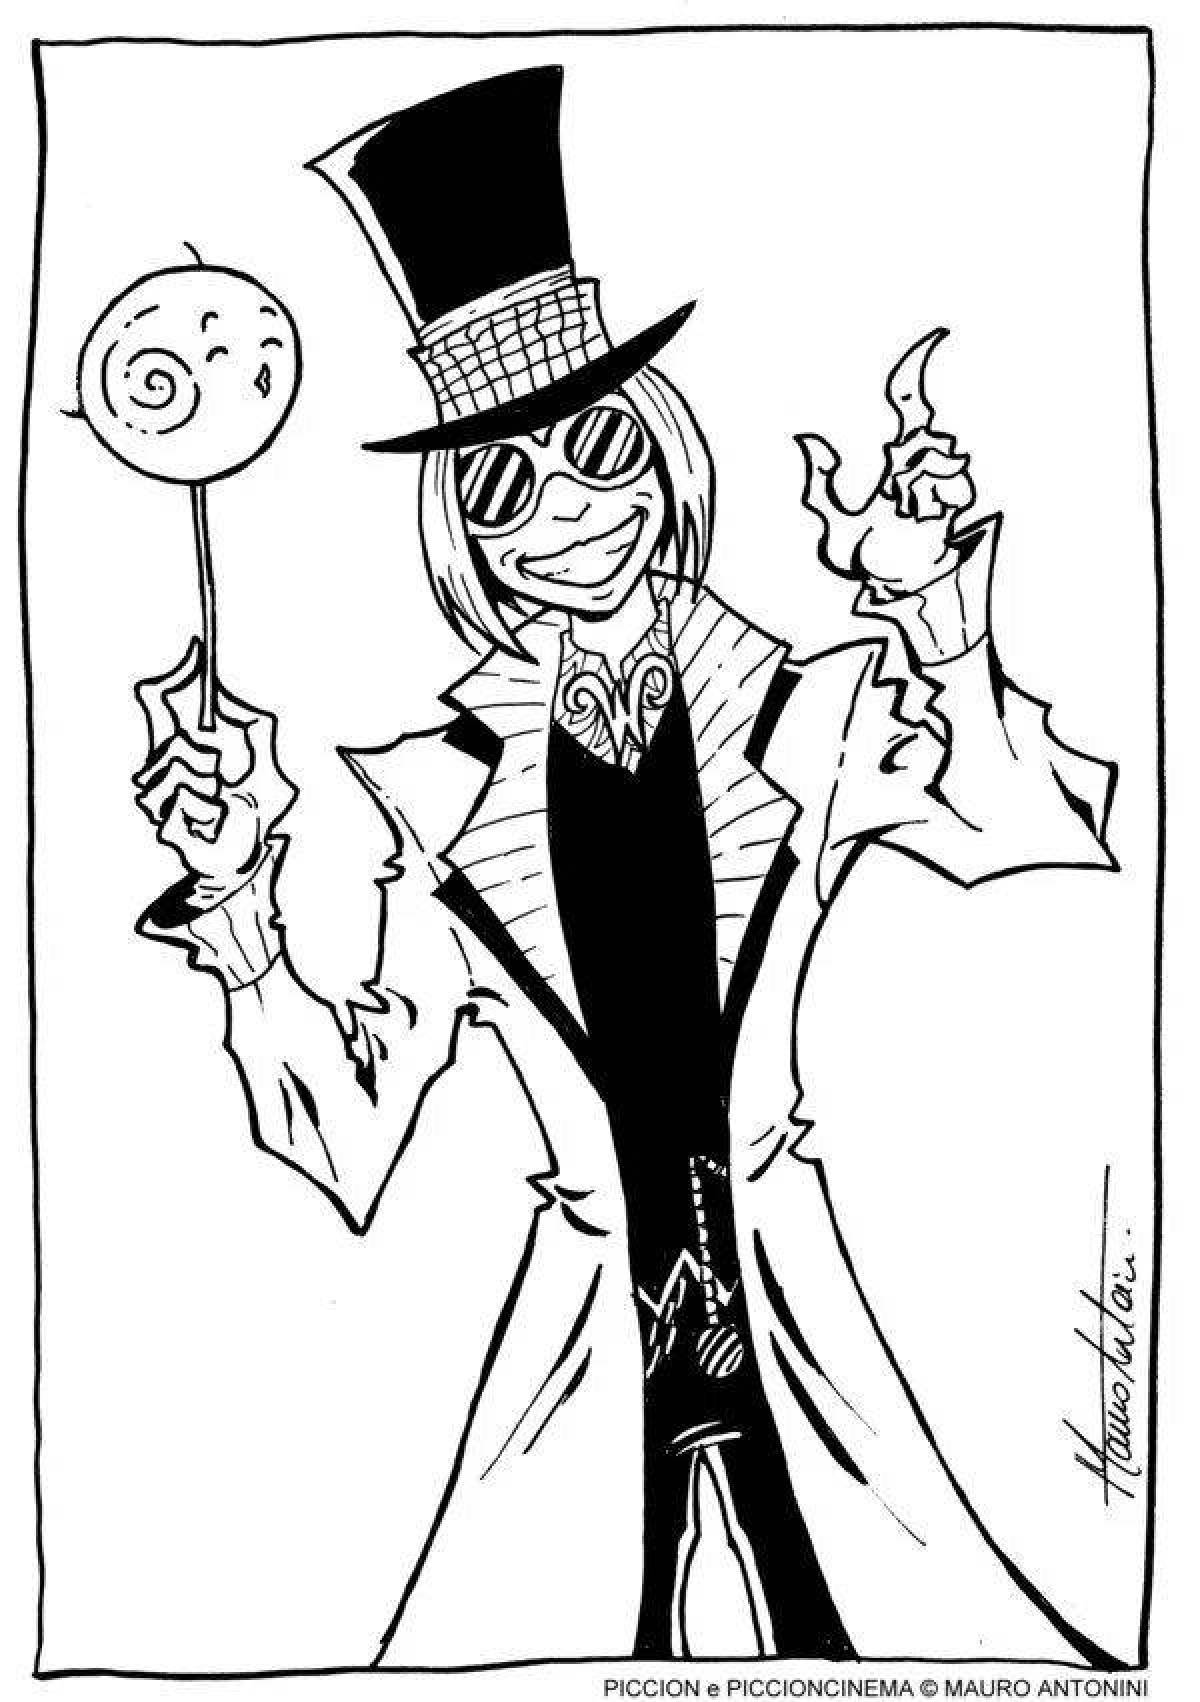 Playful willy wonka coloring page